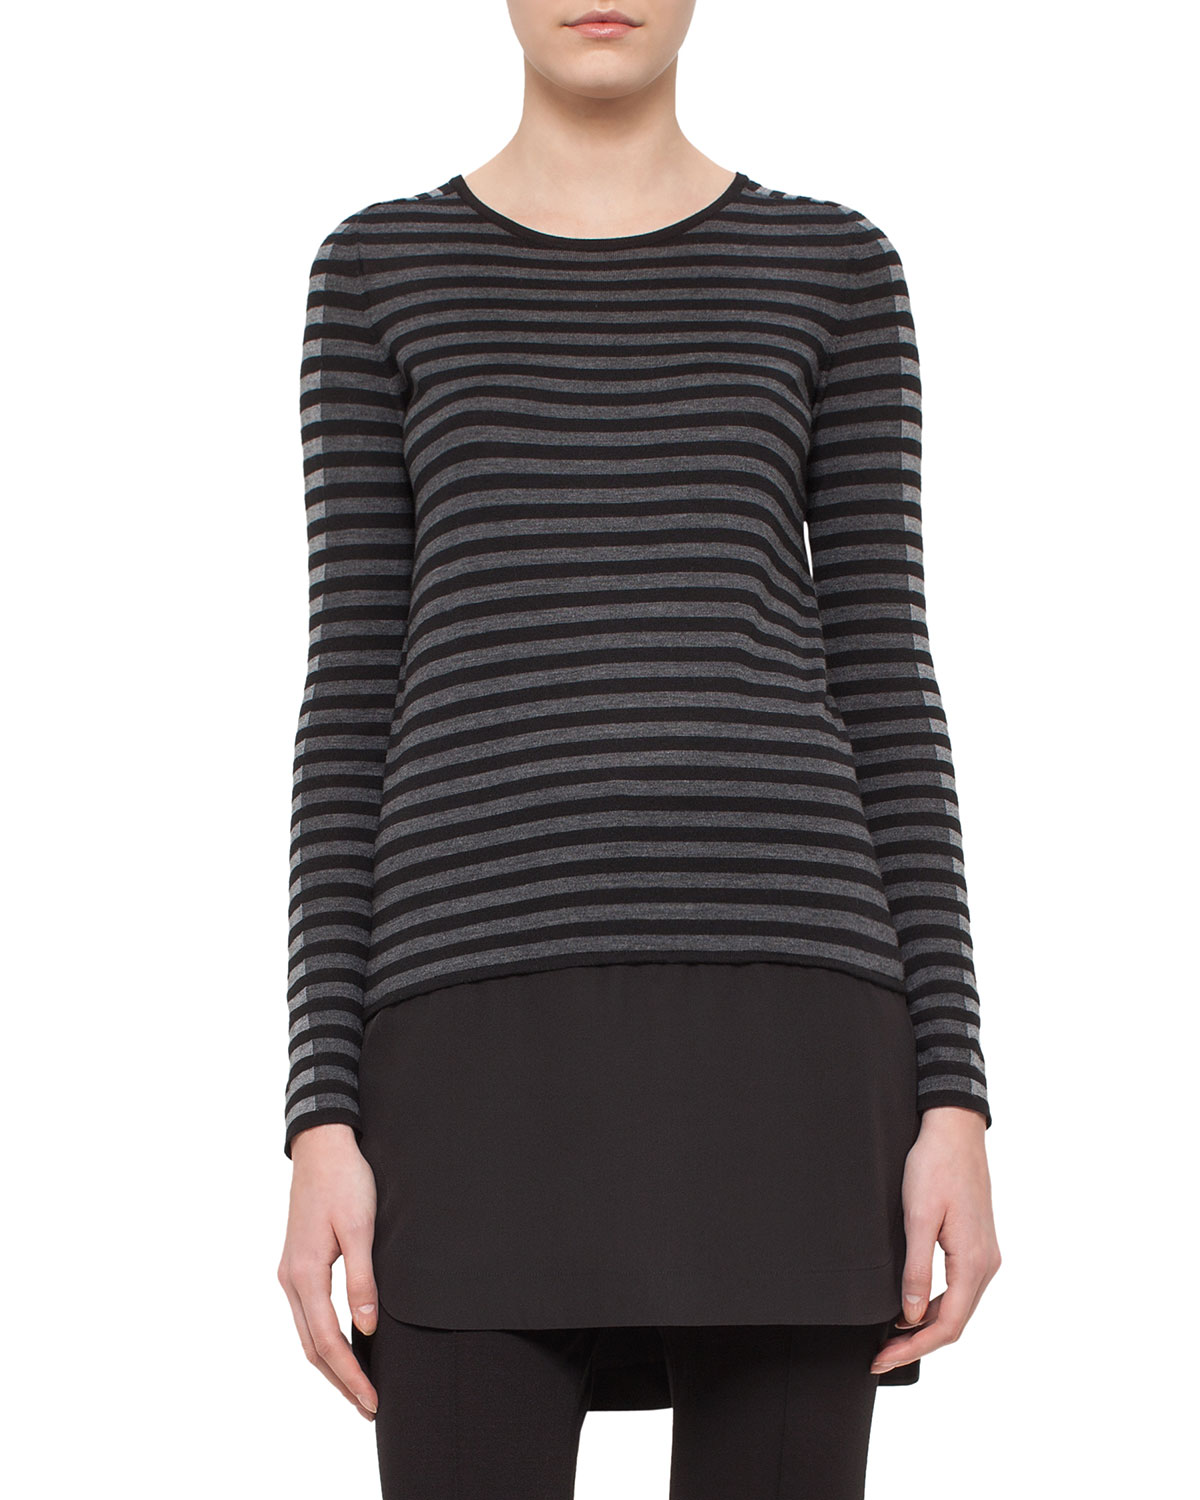 Striped Knit Long-Sleeve Tunic, Black/Cliff/Grave